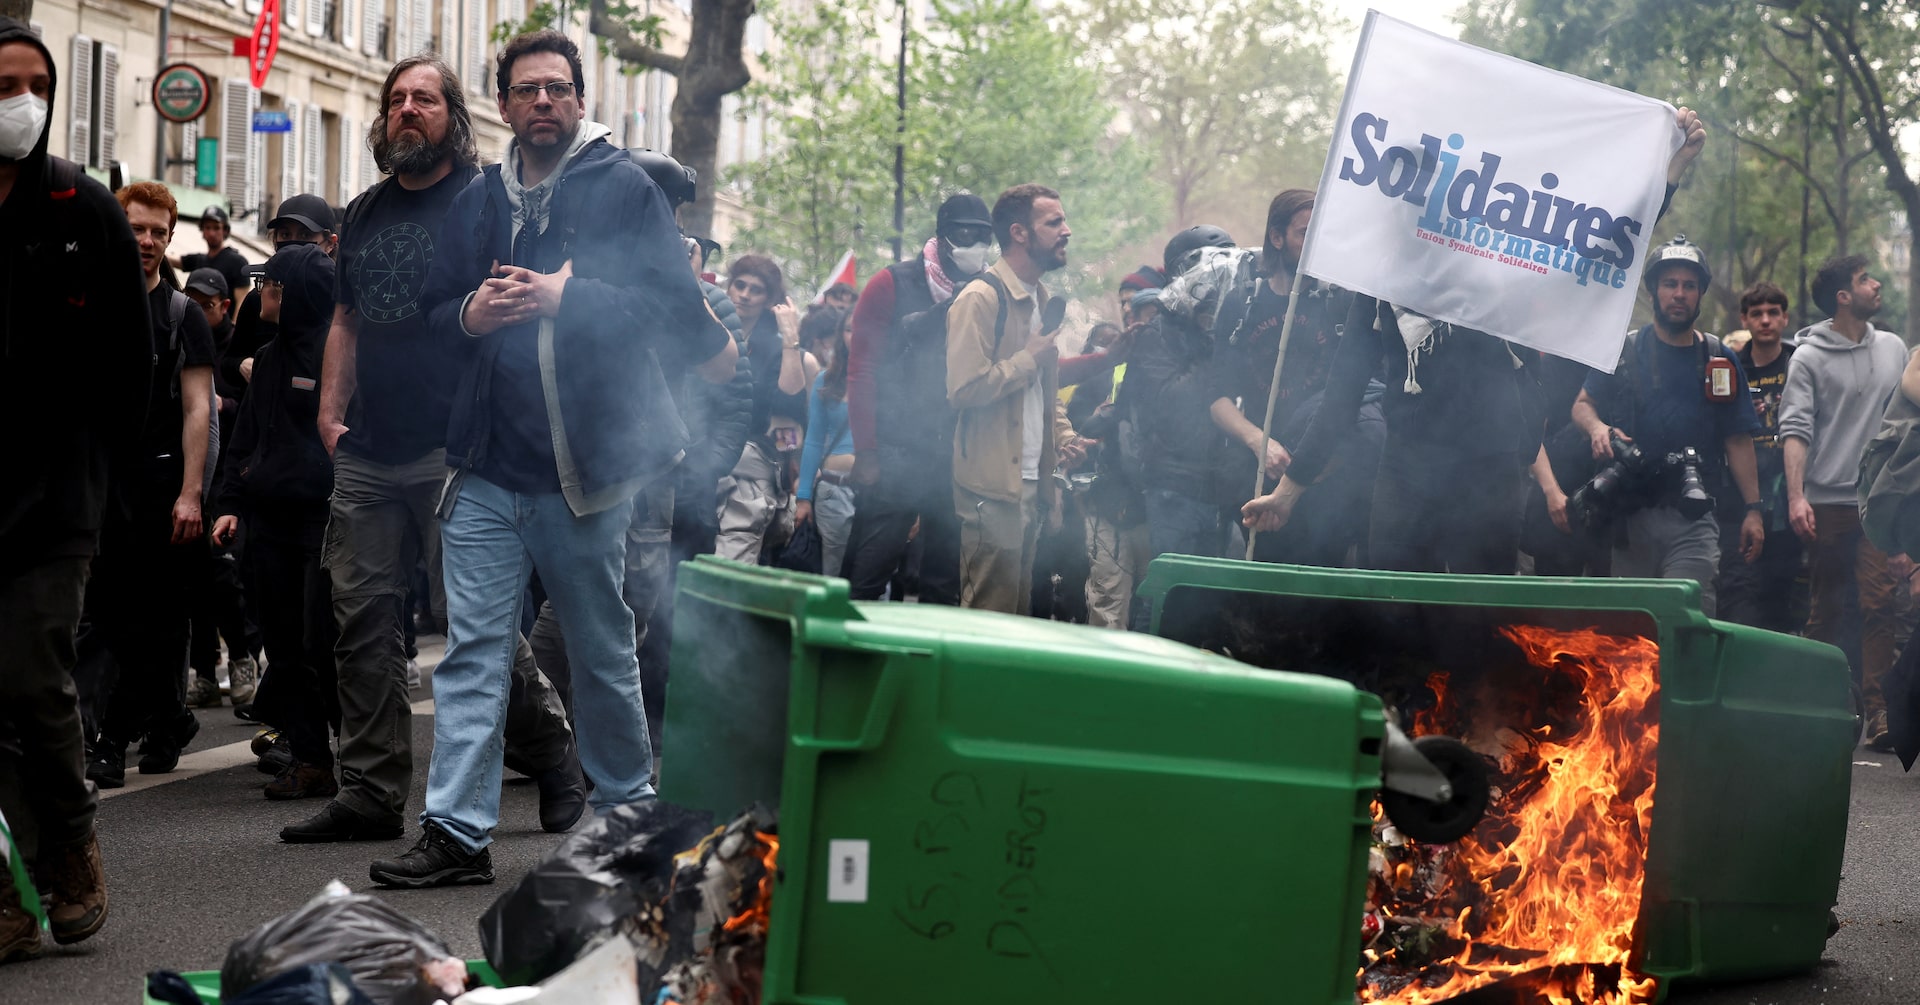 riot-police,-protesters-clash-in-paris-during-may-day-protests